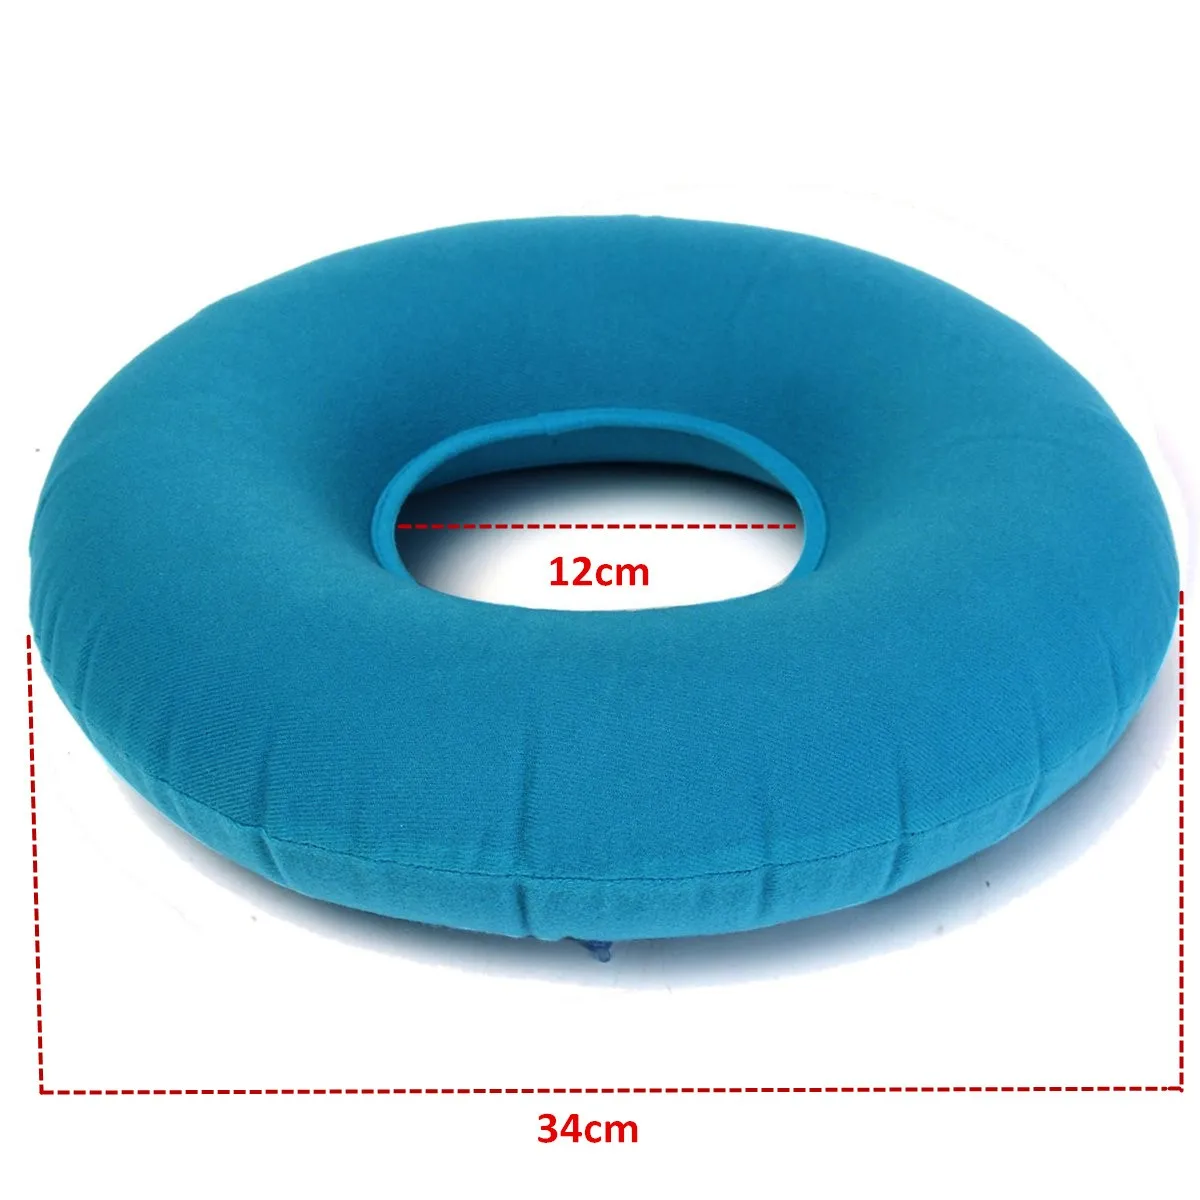 Buy Round Seat Air Cushion Nursing Supplies Bedsore Prevention Postpartum  Hemorrhoids Perforated Seat Cushion Chair Pad Seat Cushion Inflatable Donut  Cushion for Comfort and Posture, Bleeding, Piles, Bed Pain, Prostate,  Coccyx, Back